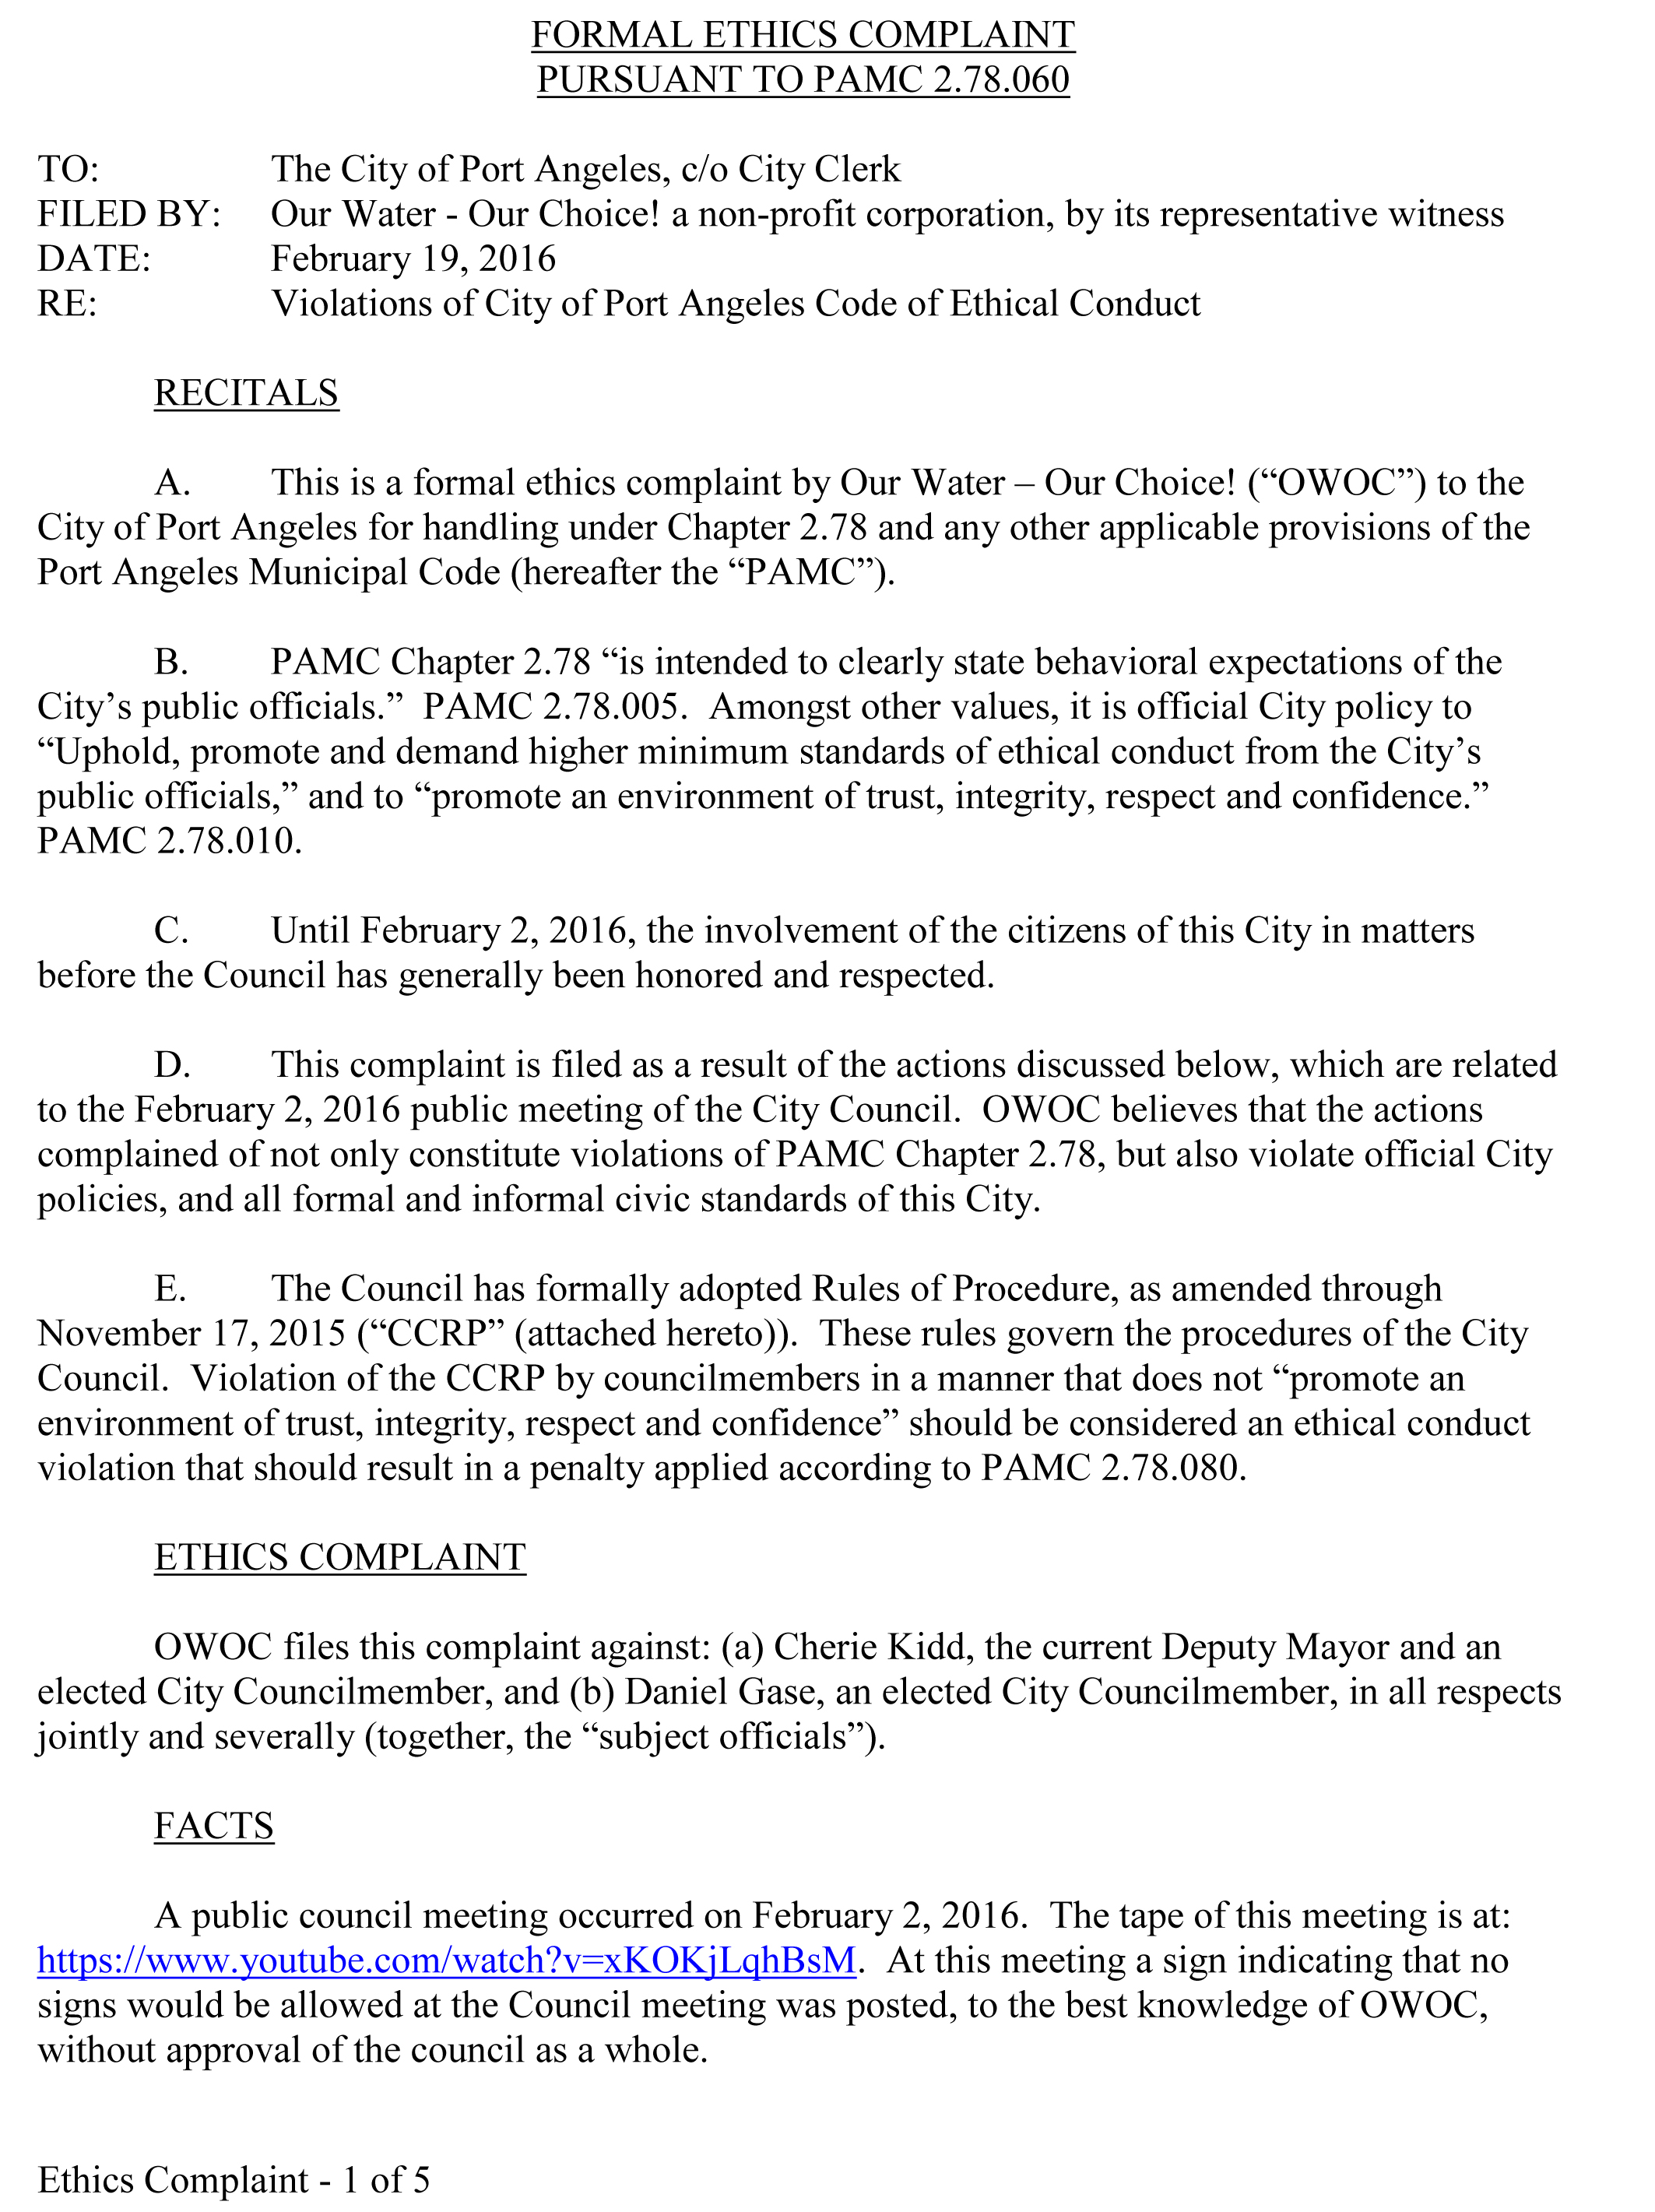 Page 1 of the ethics complaint filed against Deputy Mayor Cherie Kidd and Councilman Dan Gase. ()